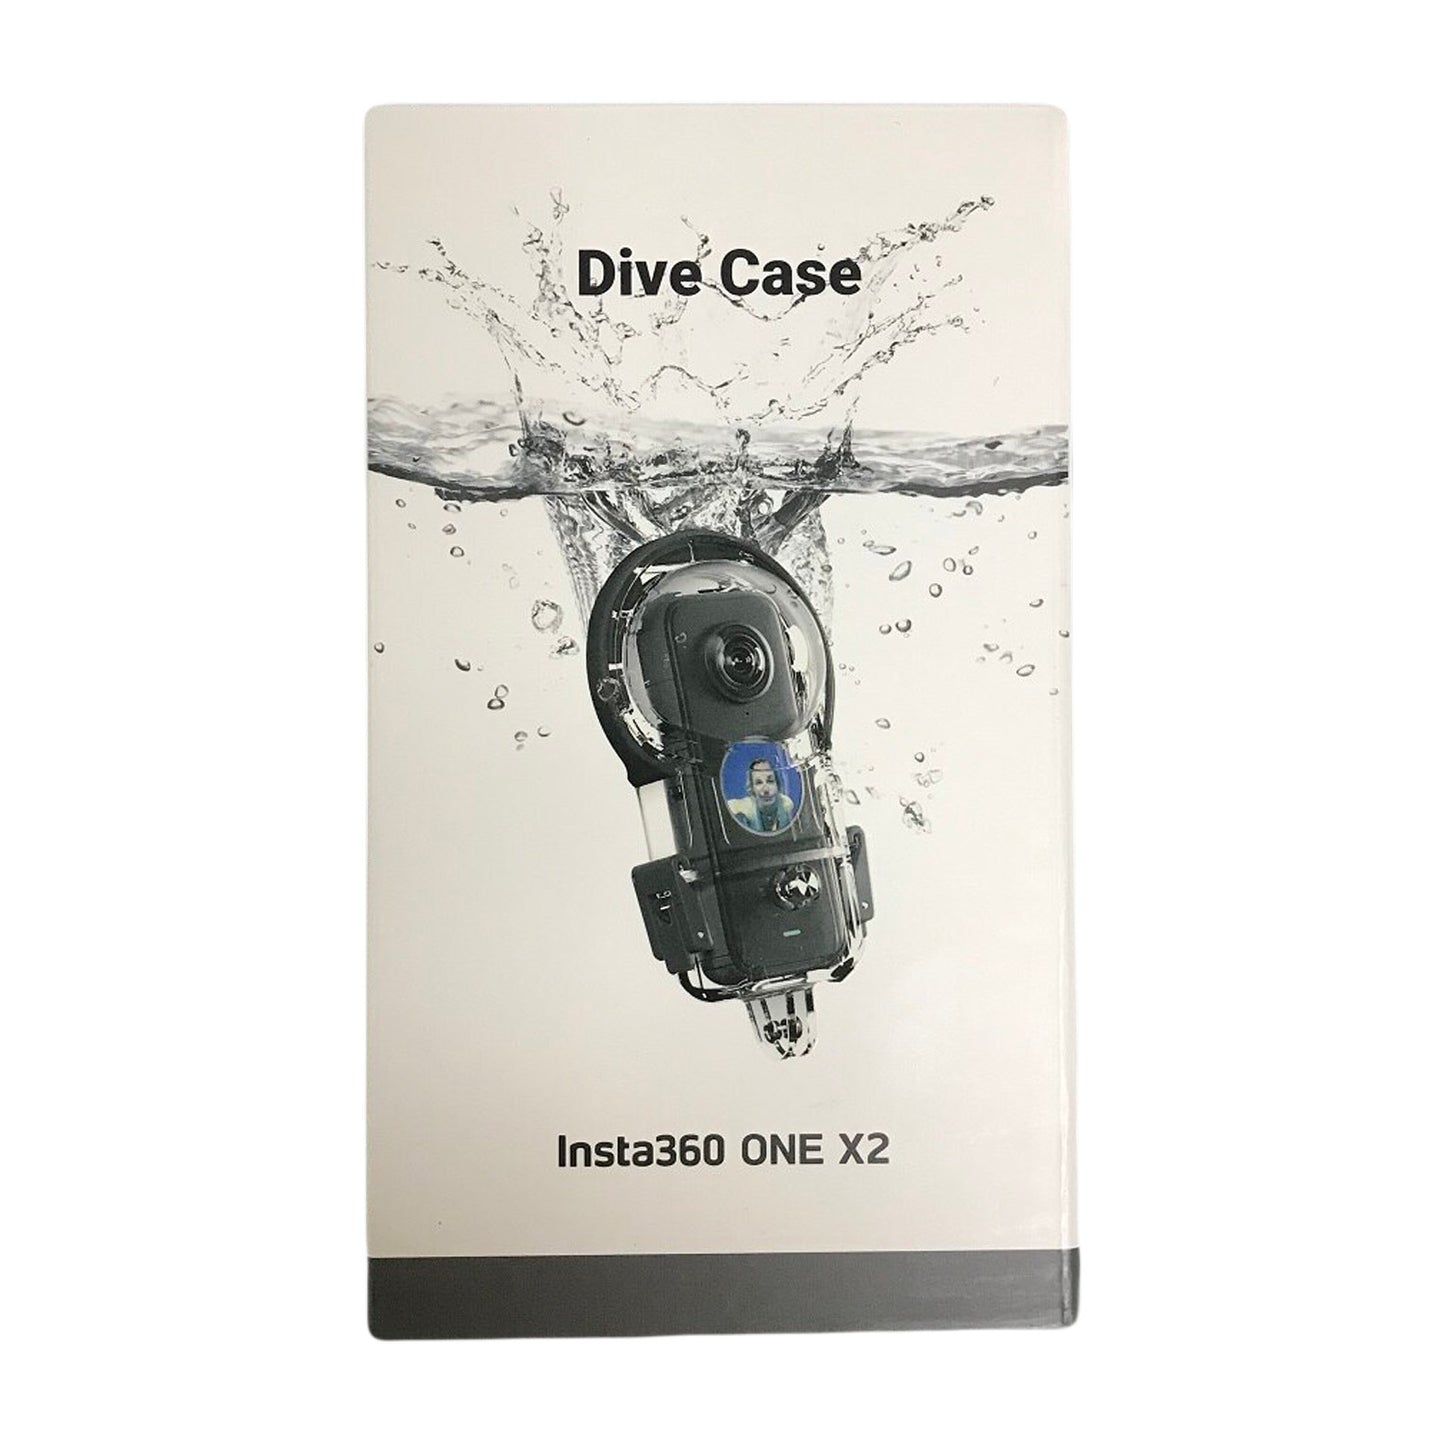 Insta360 ONE X2 Camera Dive Case 45-meter IPX8 Waterproof Camera Housing with Anti-Fog Inserts